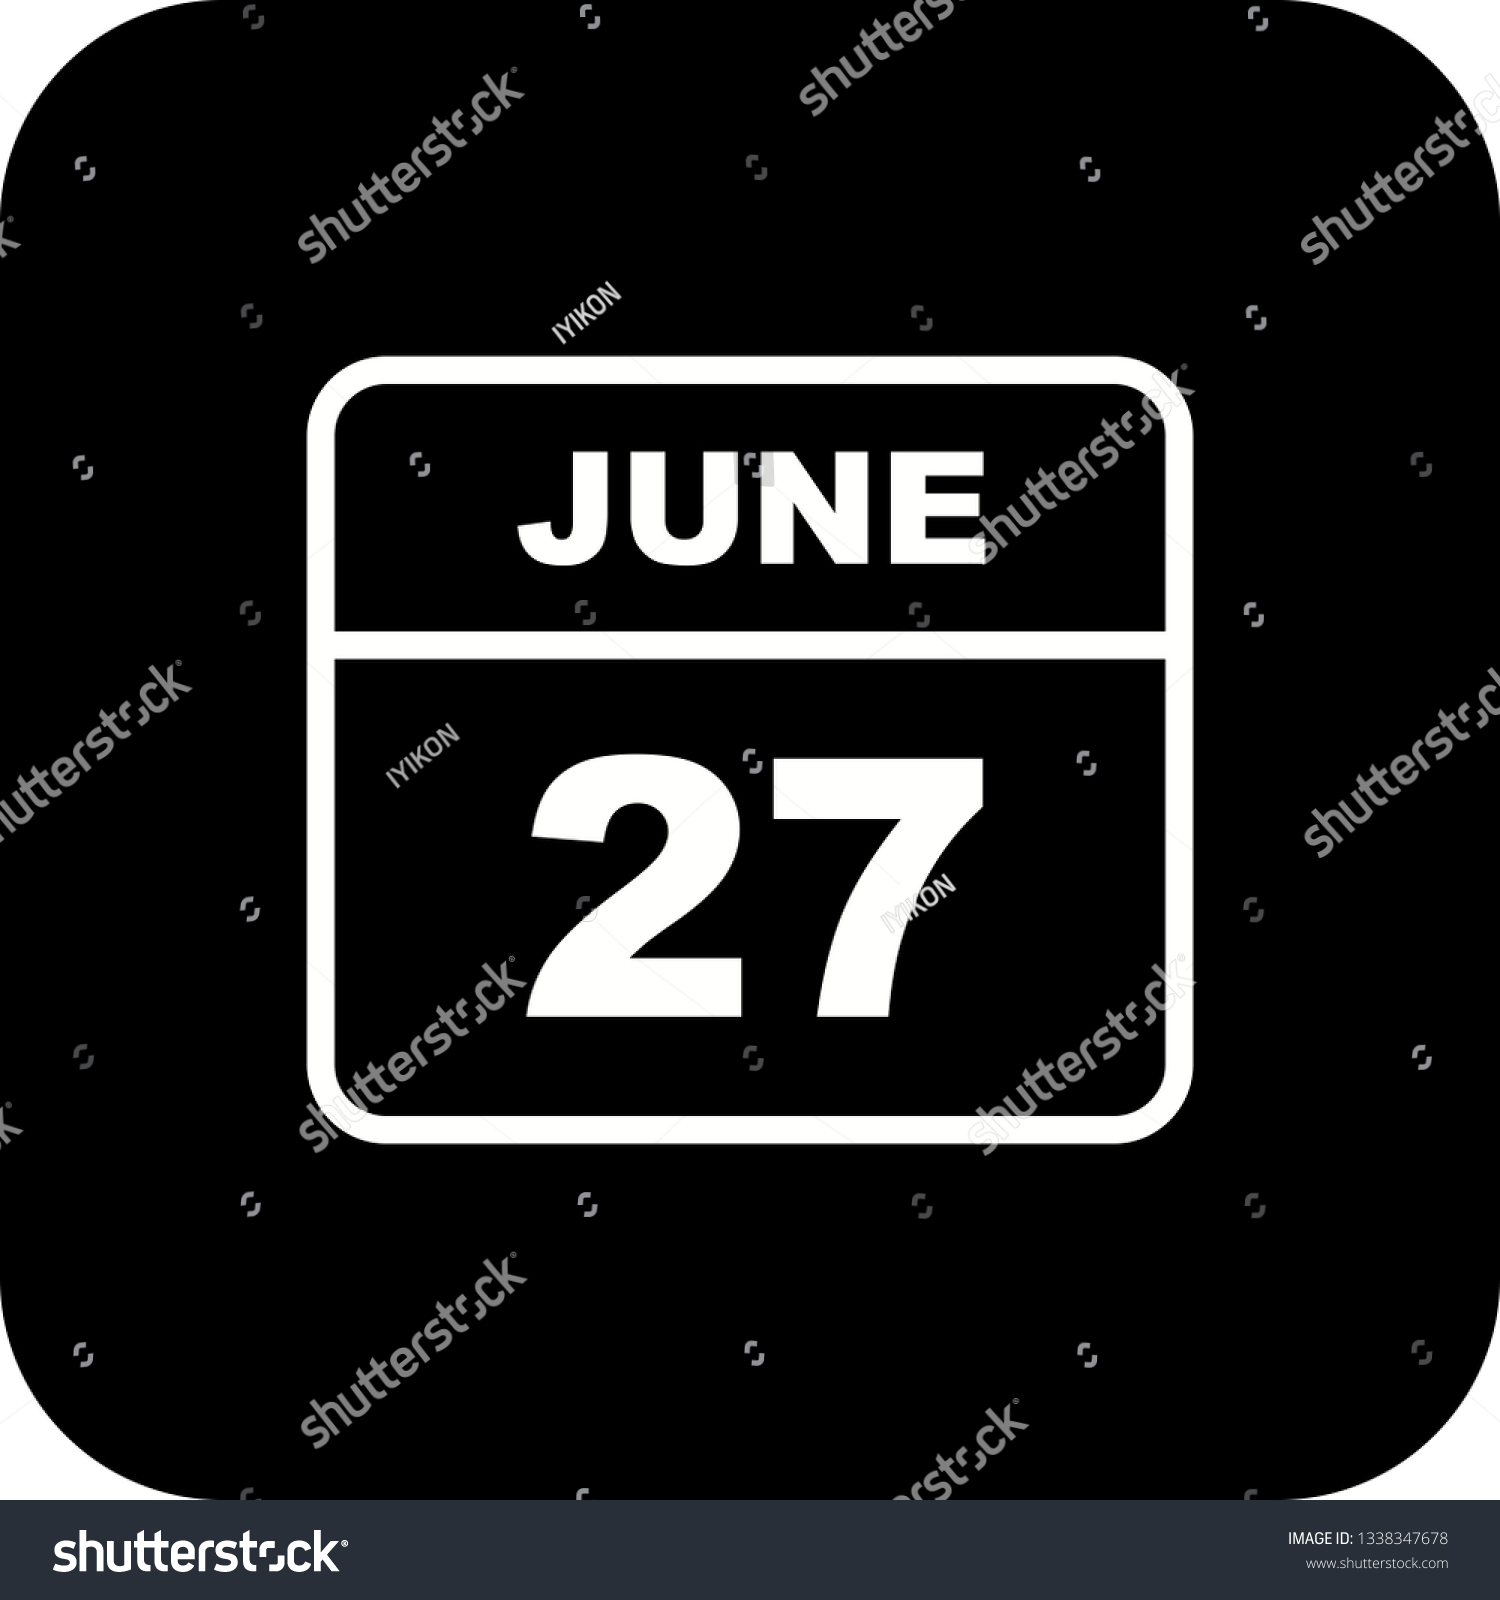 June 27th Date on a Single Day Calendar Royalty Free Stock Vector